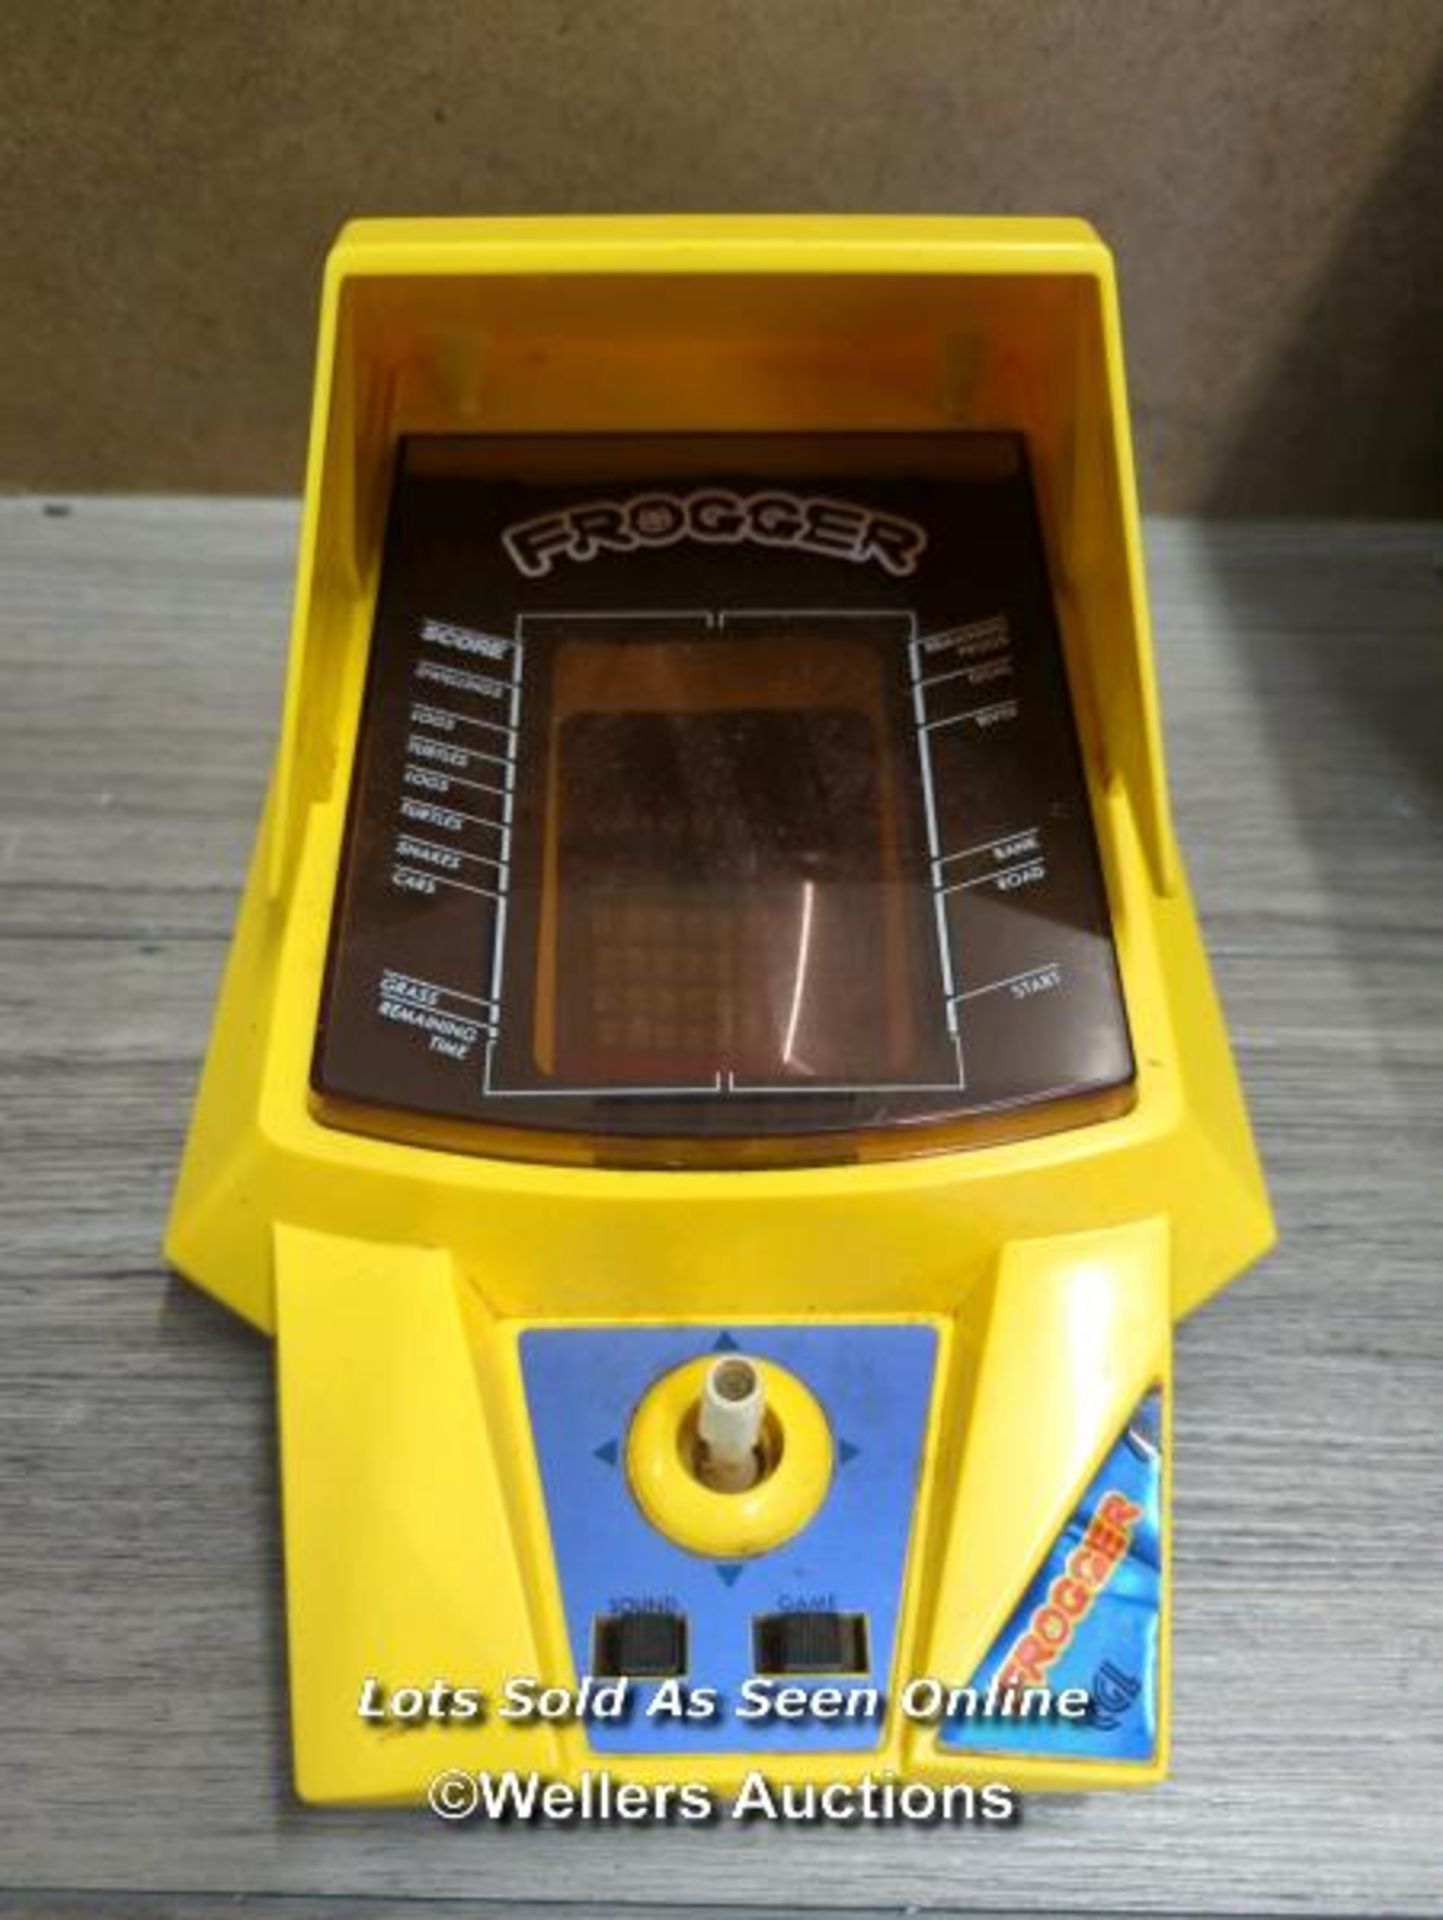 VINTAGE KONAMI FROGGER TABLETOP GAME, WITH ORIGINAL BOX AND PACKING FOAM - Image 3 of 9